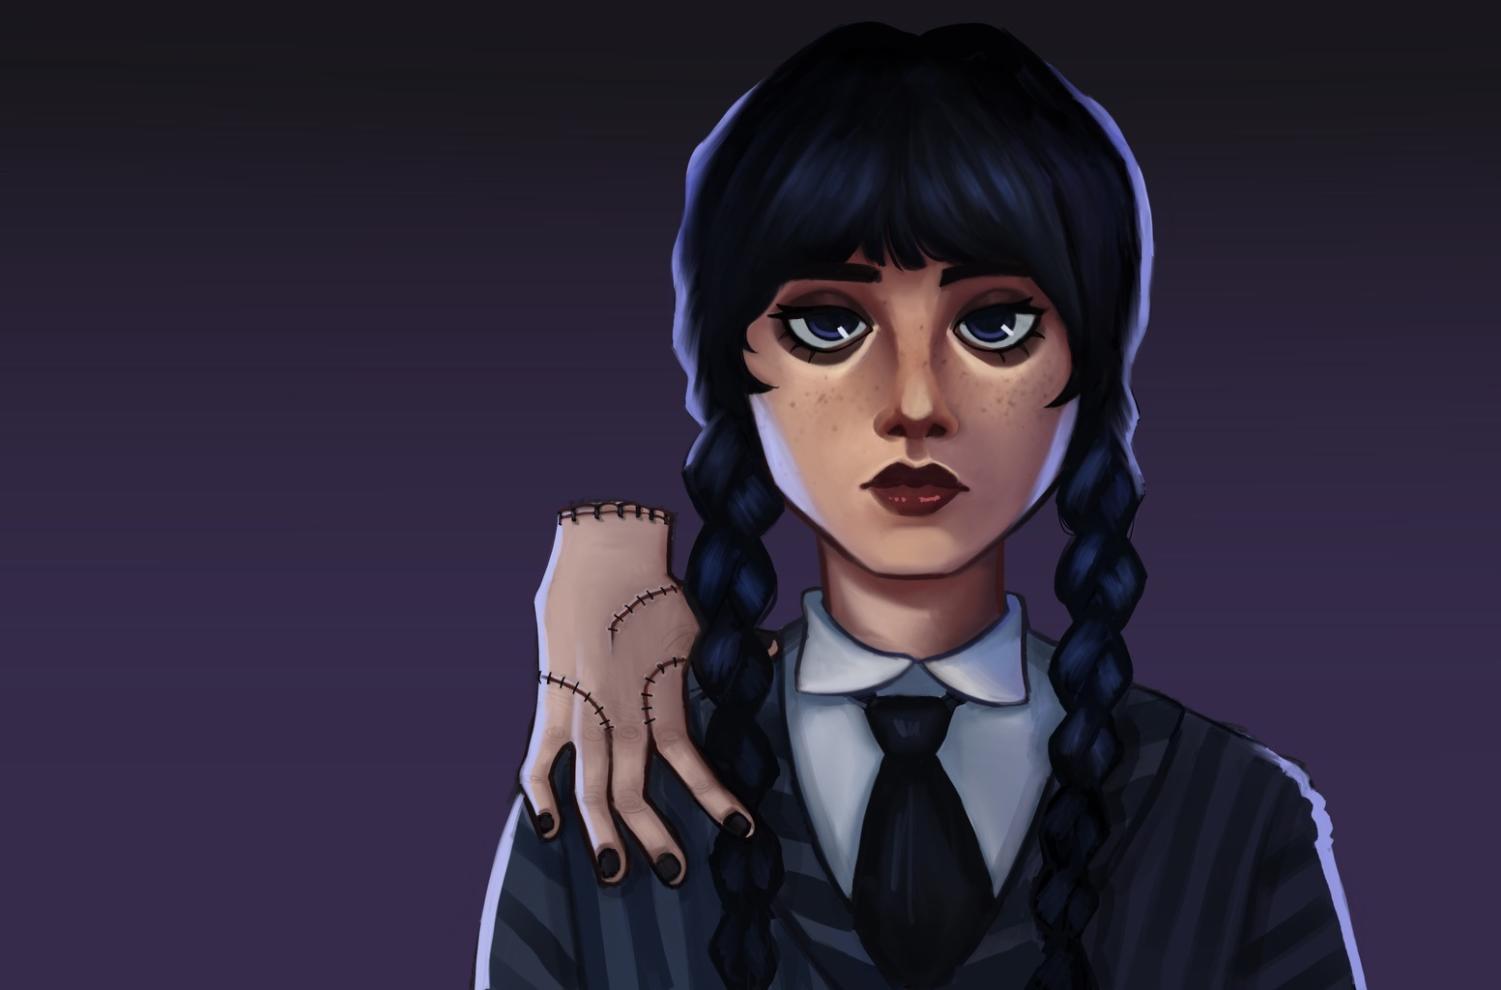 Wednesday Addams & Enid Sinclair: A window into the relationship